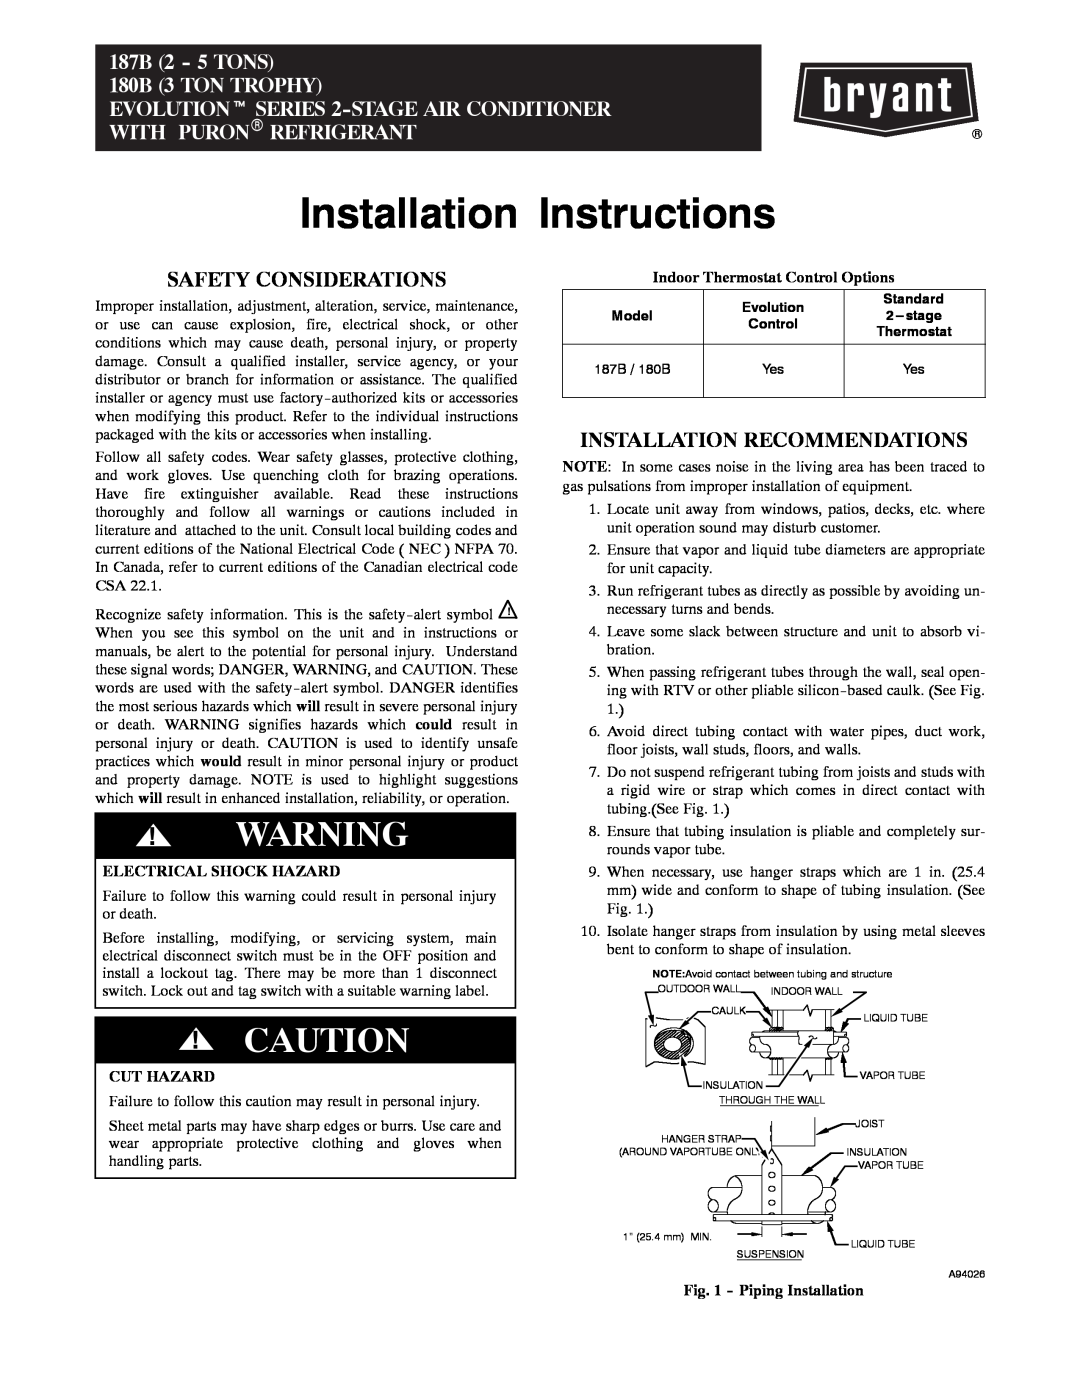 Bryant 187B installation instructions Safety Considerations, Installation Recommendations, Electrical Shock Hazard 